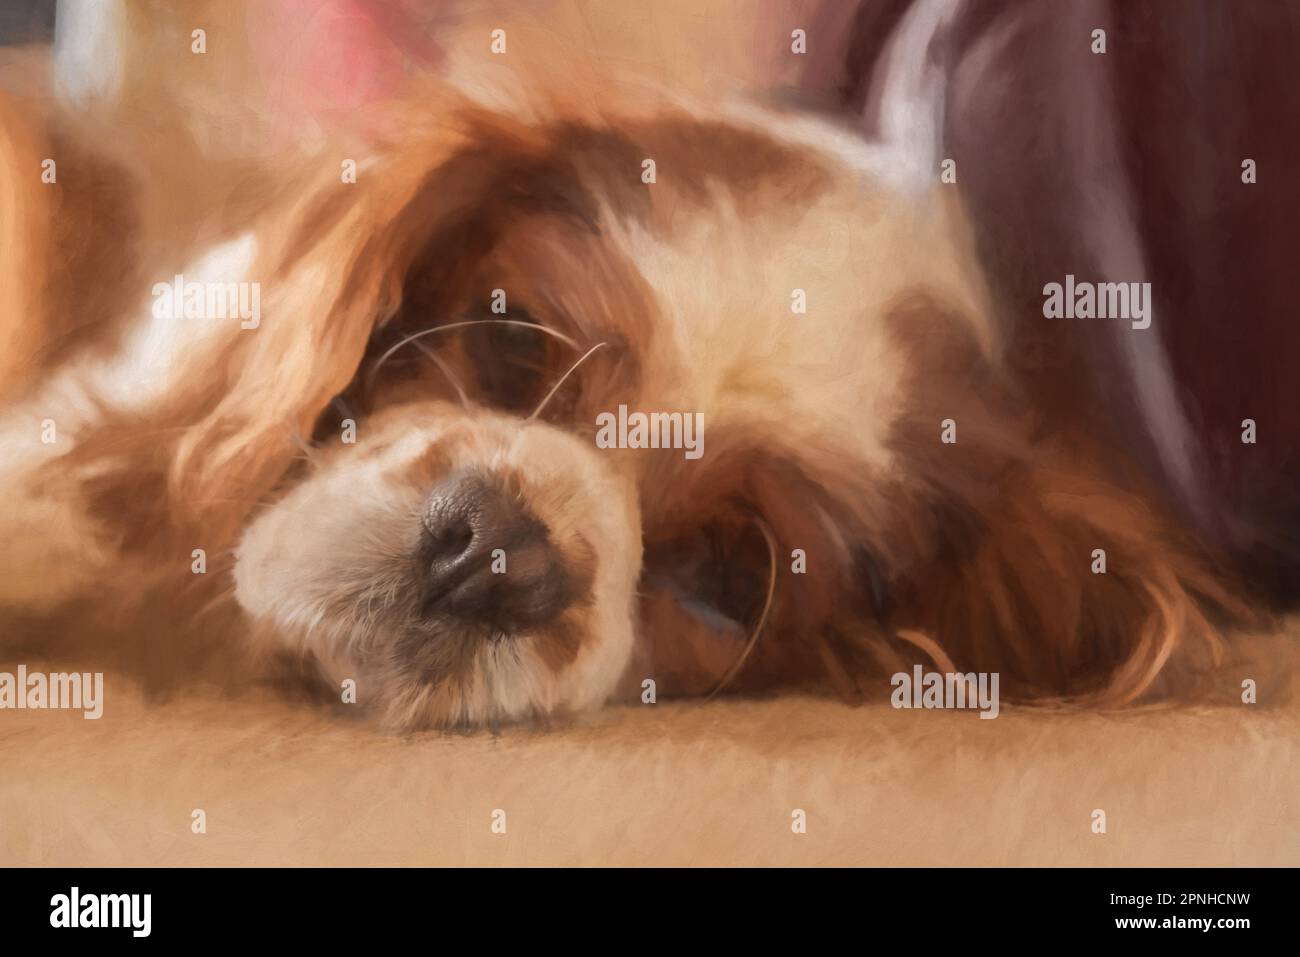 Digital painting of a closeup profile shot of a single isolated Blenheim Cavalier King Charles Spaniel. Stock Photo